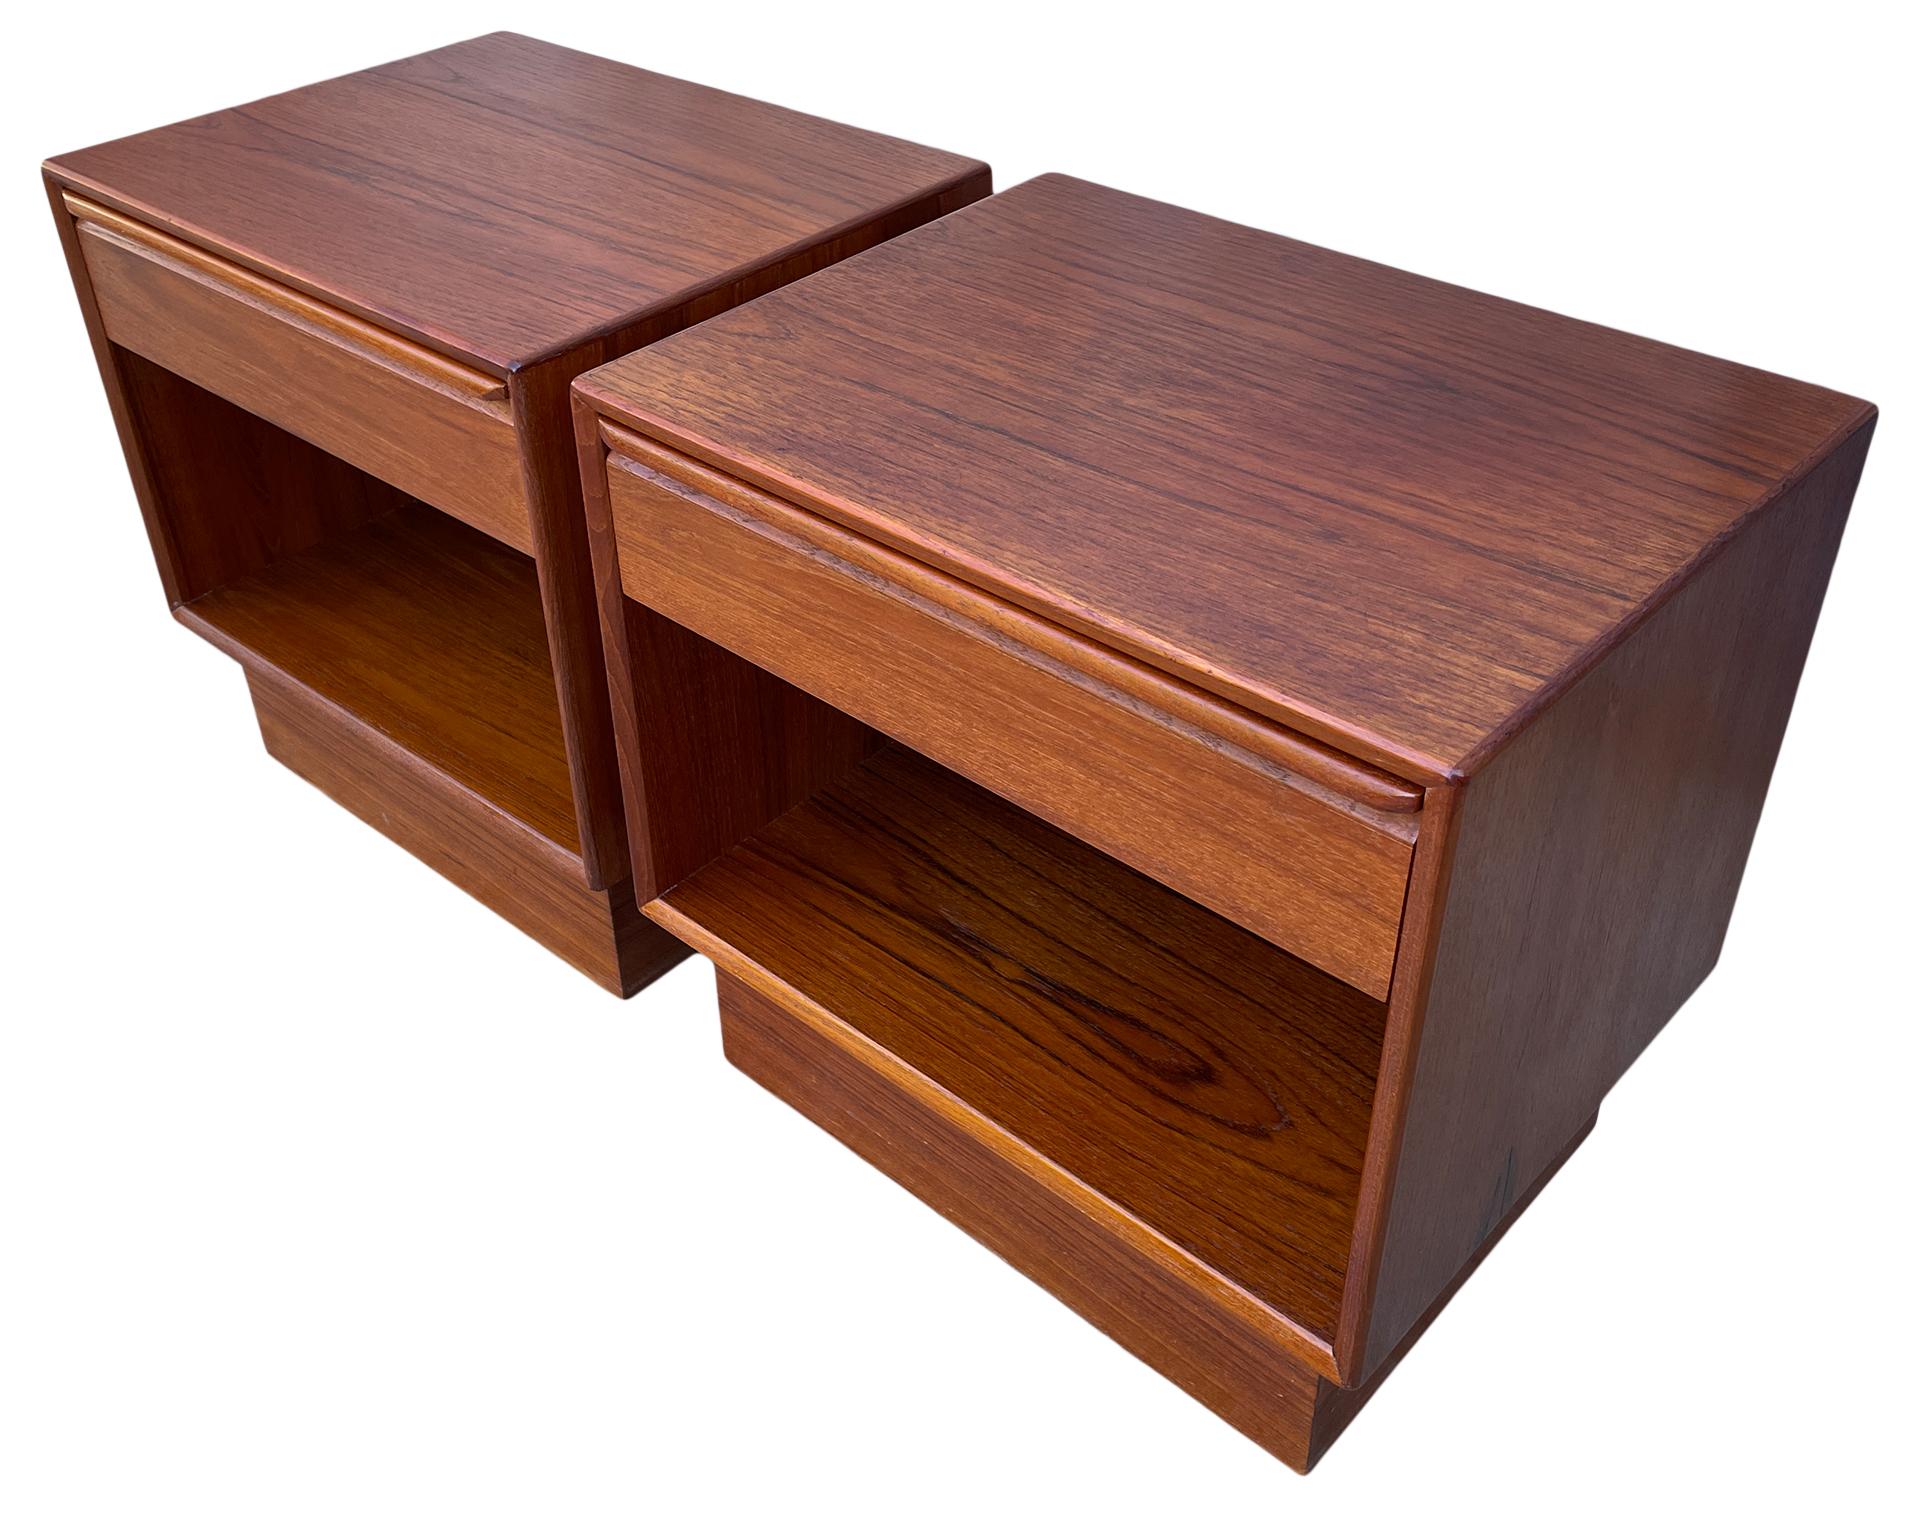 Beautiful pair of mid-century Norwegian modern teak single-drawer nightstands by Westnofa. Great design and great vintage condition - clean inside and out. Drawers slide smooth with dovetail construction and carved handles with open space below